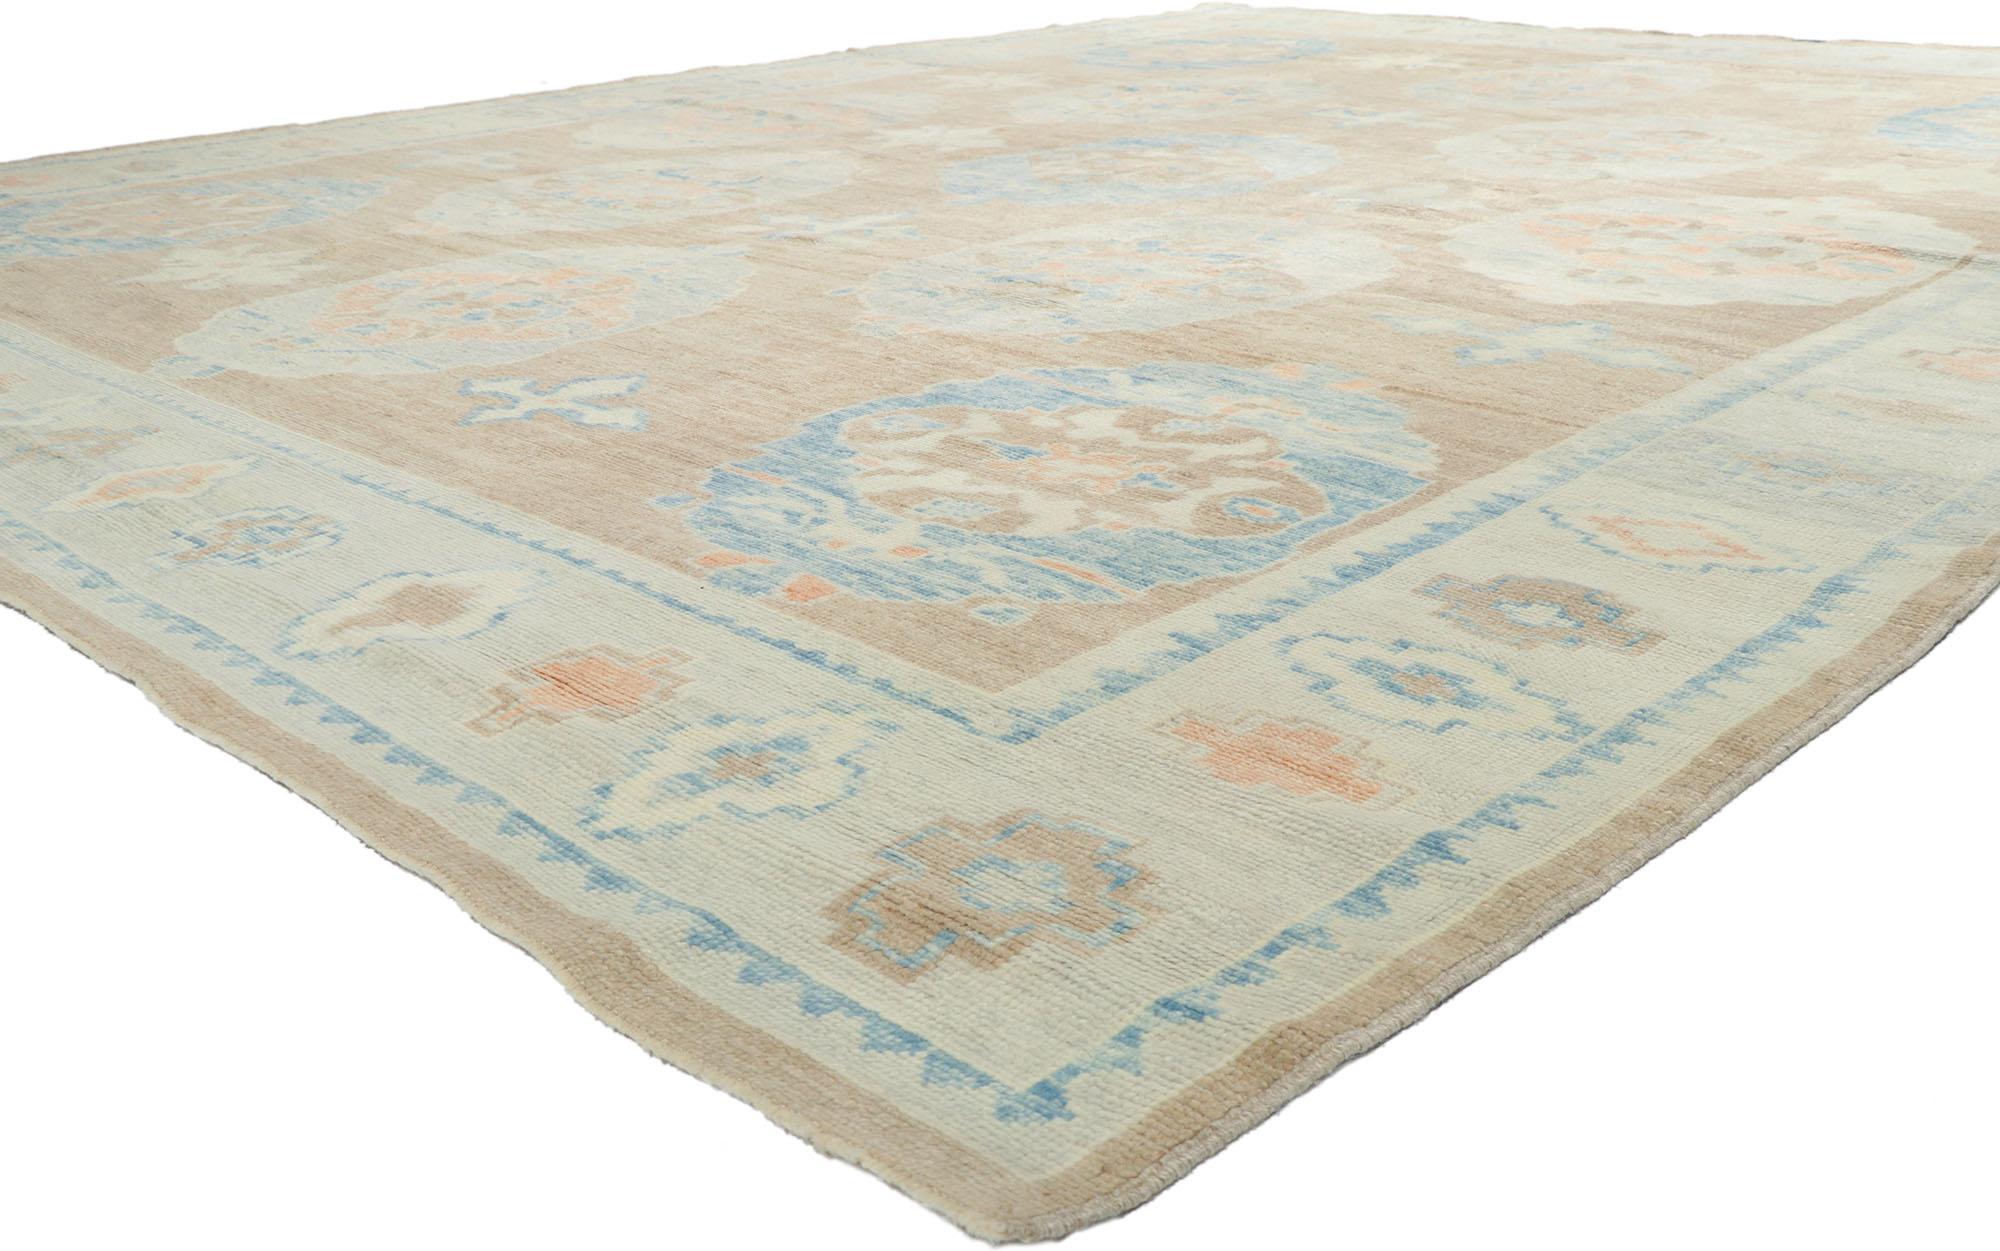 53583 New Contemporary Turkish Oushak Rug with Modern Style 11'11 x 15'02. Balancing traditional sensibility and relaxed coastal style, this hand knotted wool contemporary Turkish Oushak rug beautifully is a captivating vision of woven beauty. The